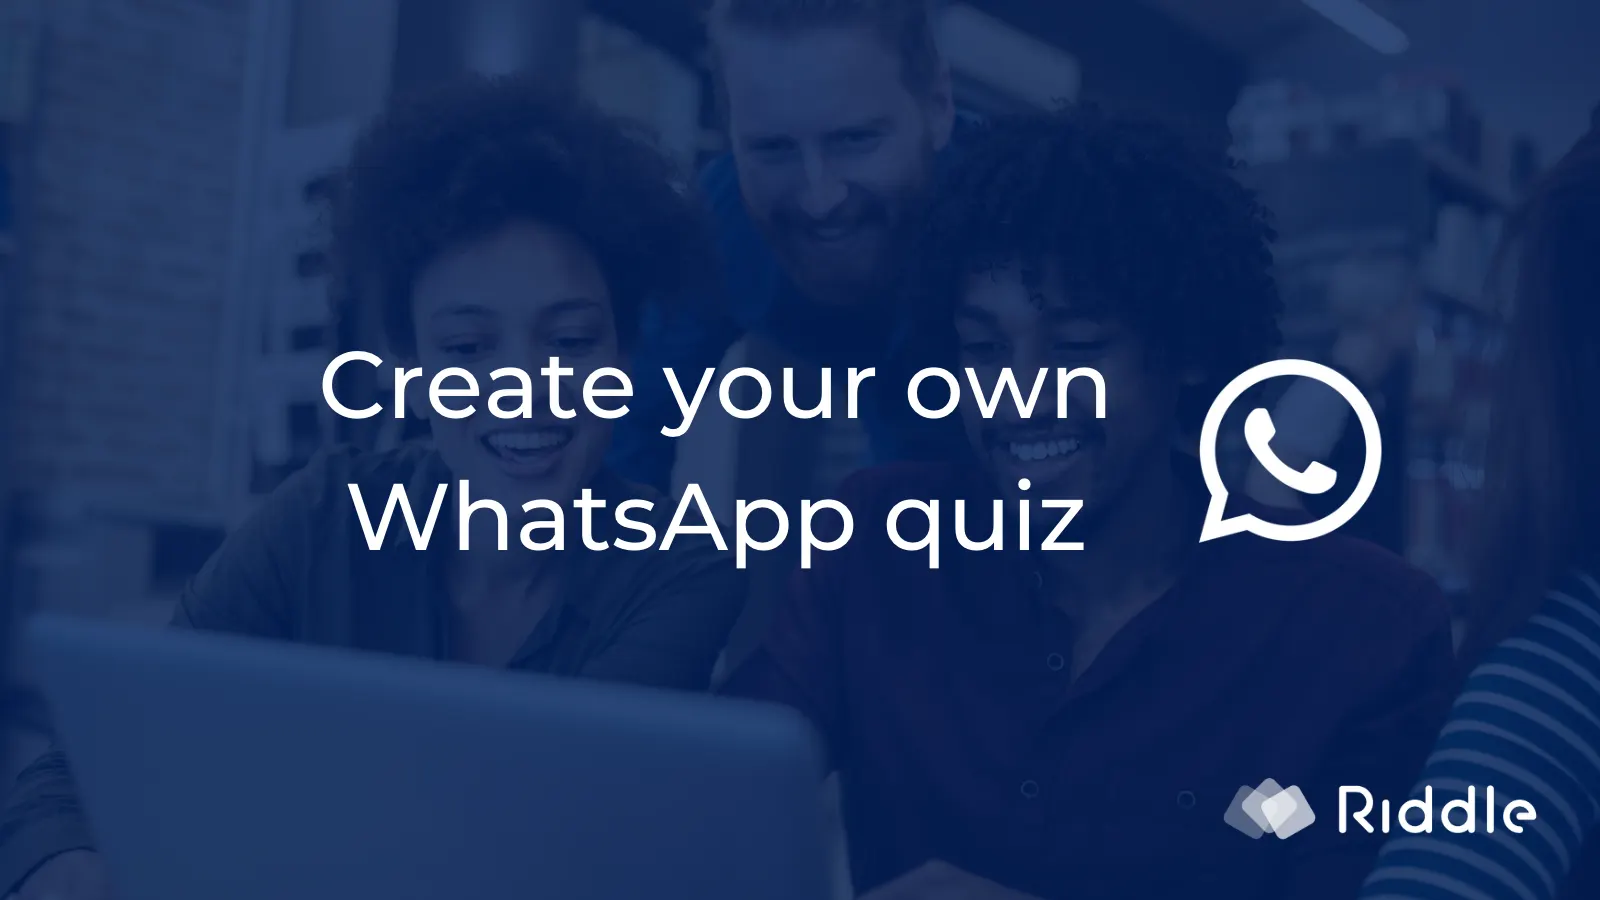 Create your own WhatsApp quiz with Riddle's quiz maker